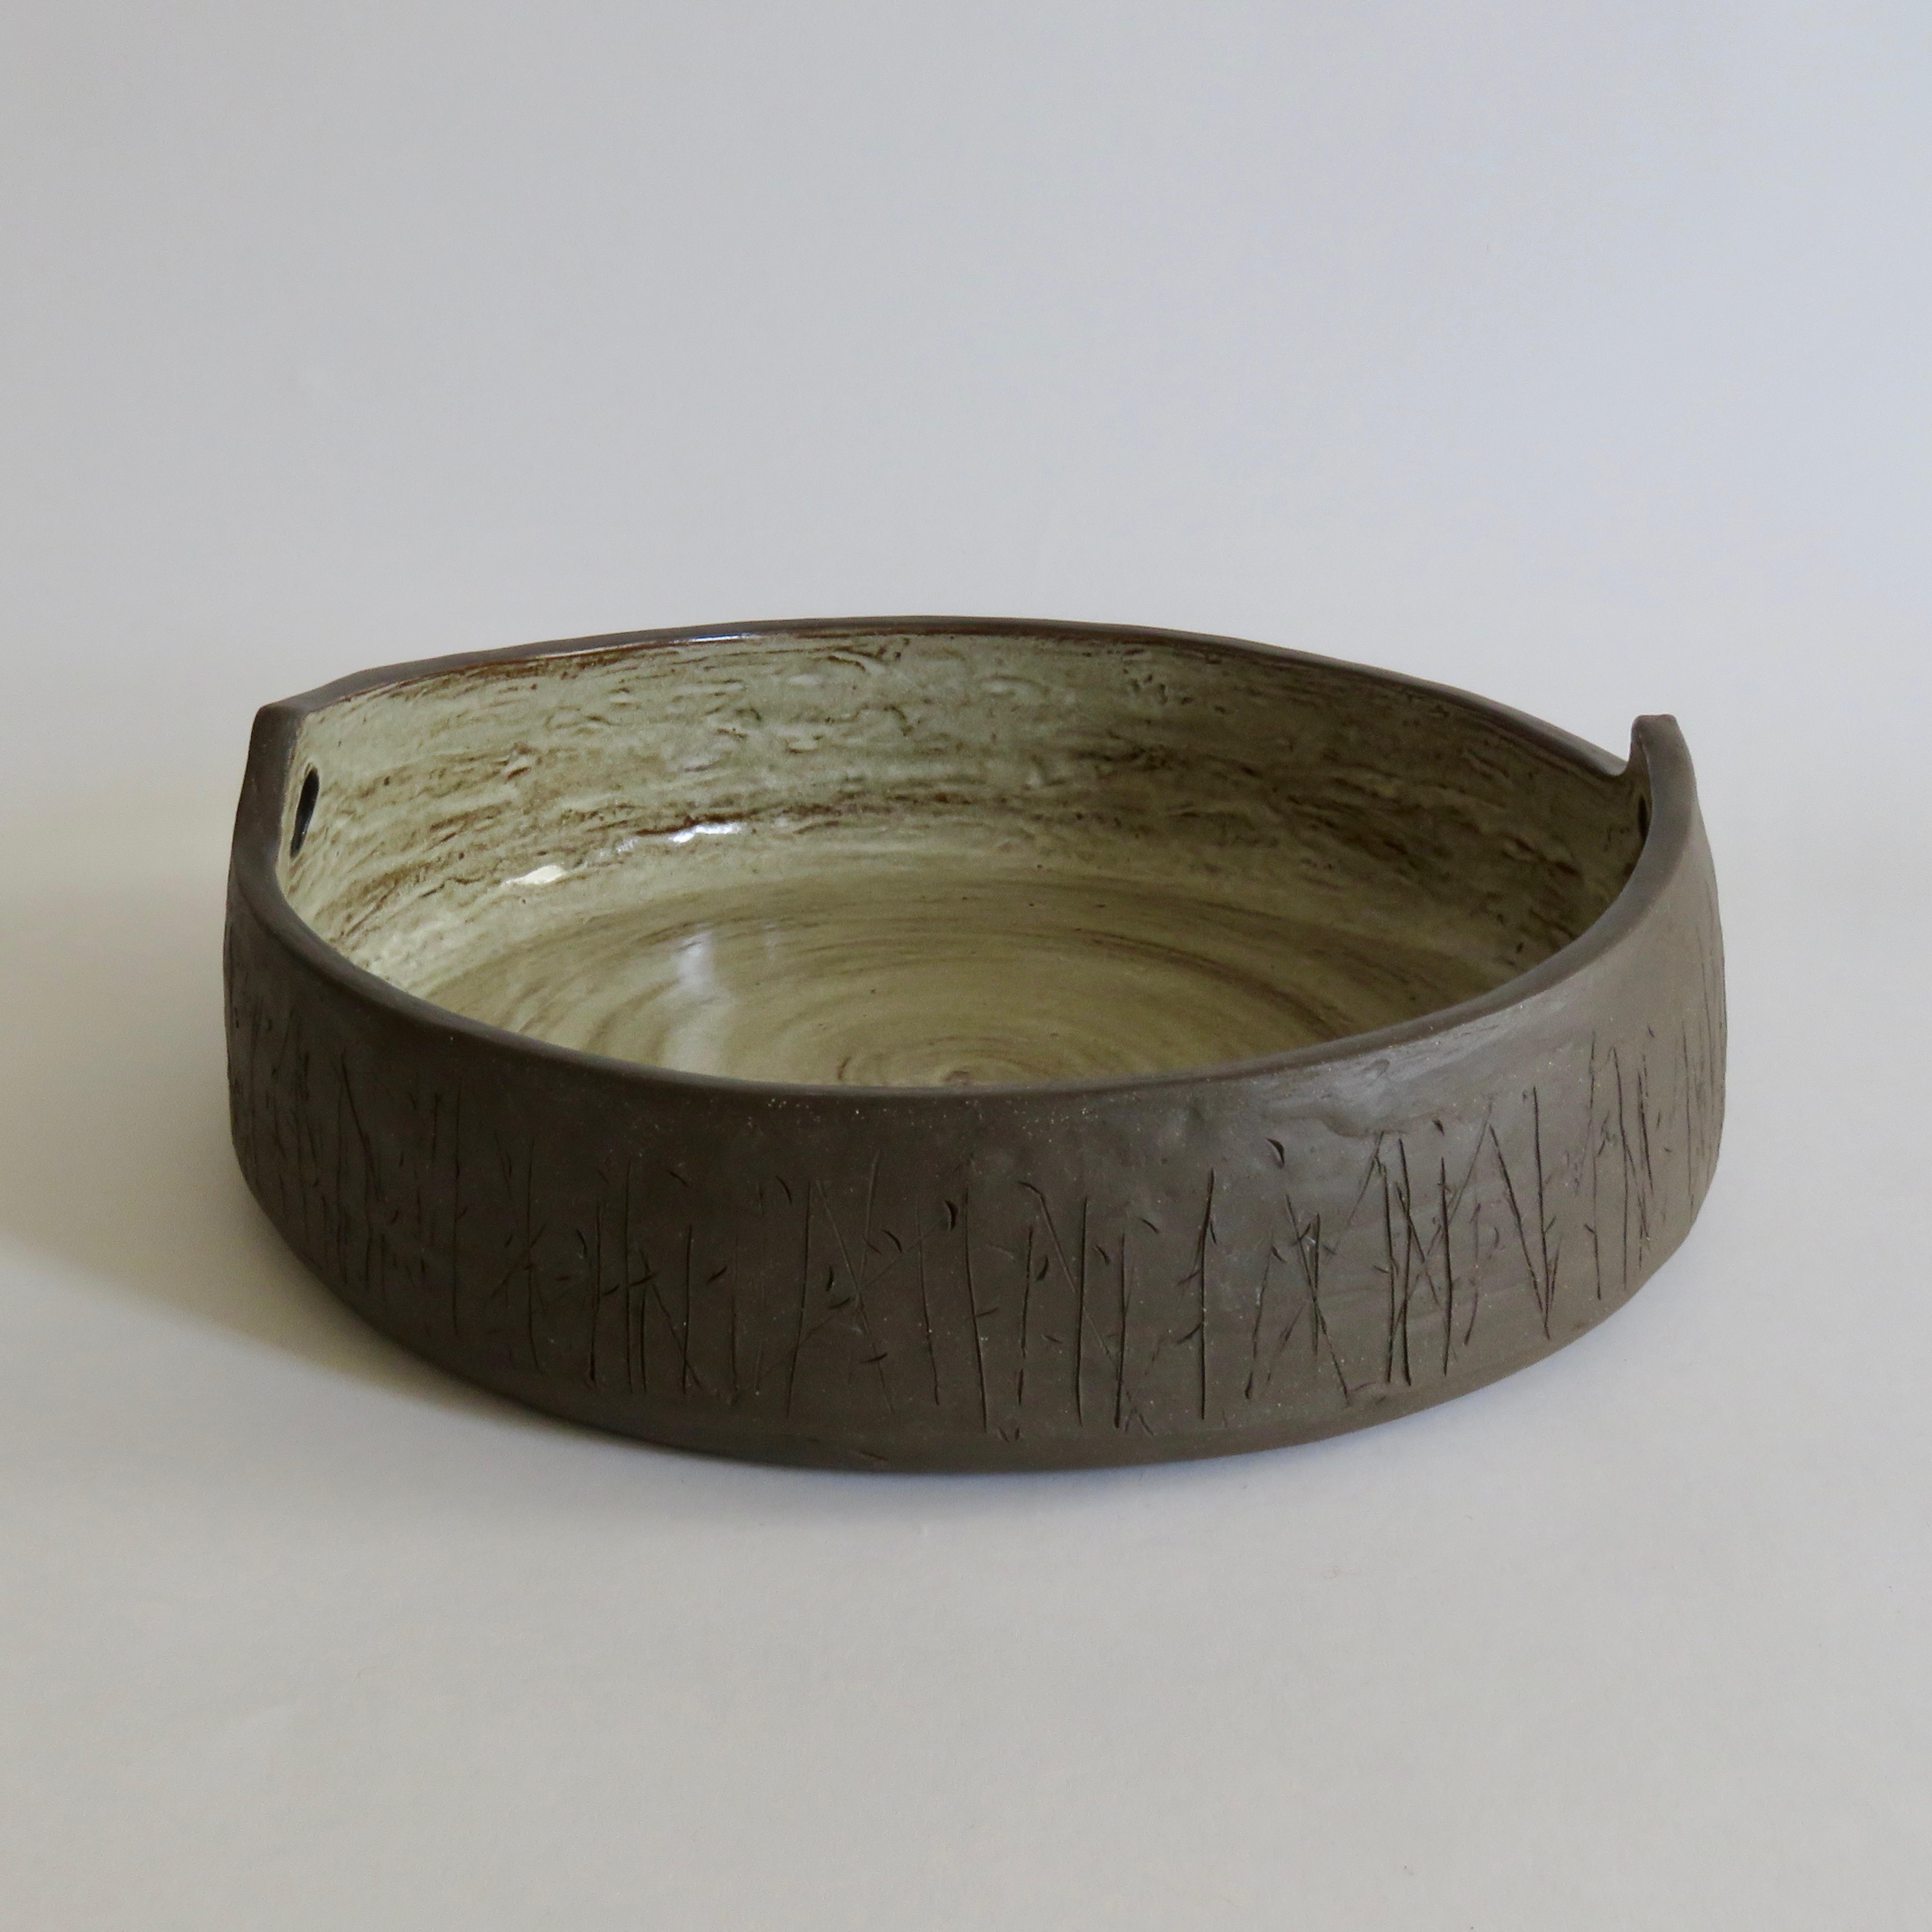 Contemporary Large Serving Bowl, Brown Clay with Portholes and Glazed Interior, Hand Built 